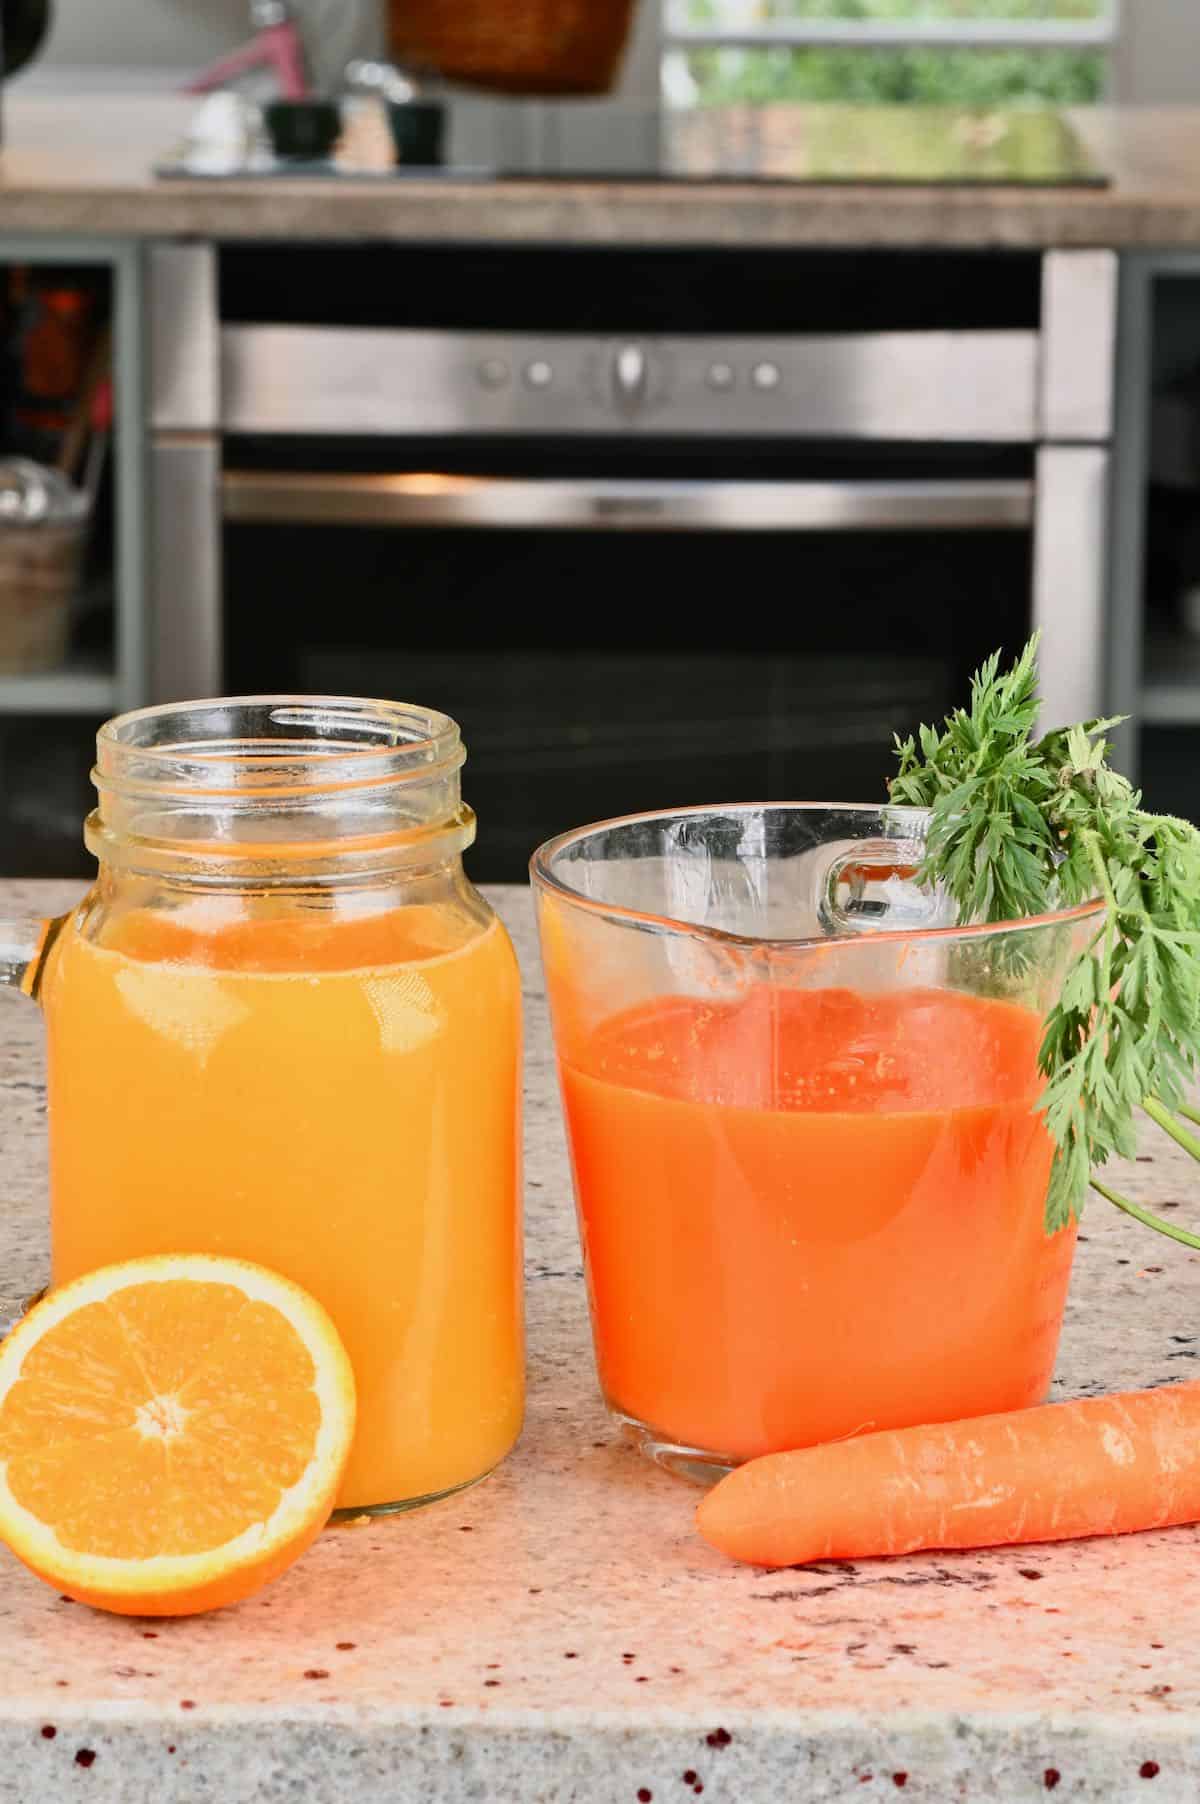 Mason jar with orange juice and measuring cup with carrot juice